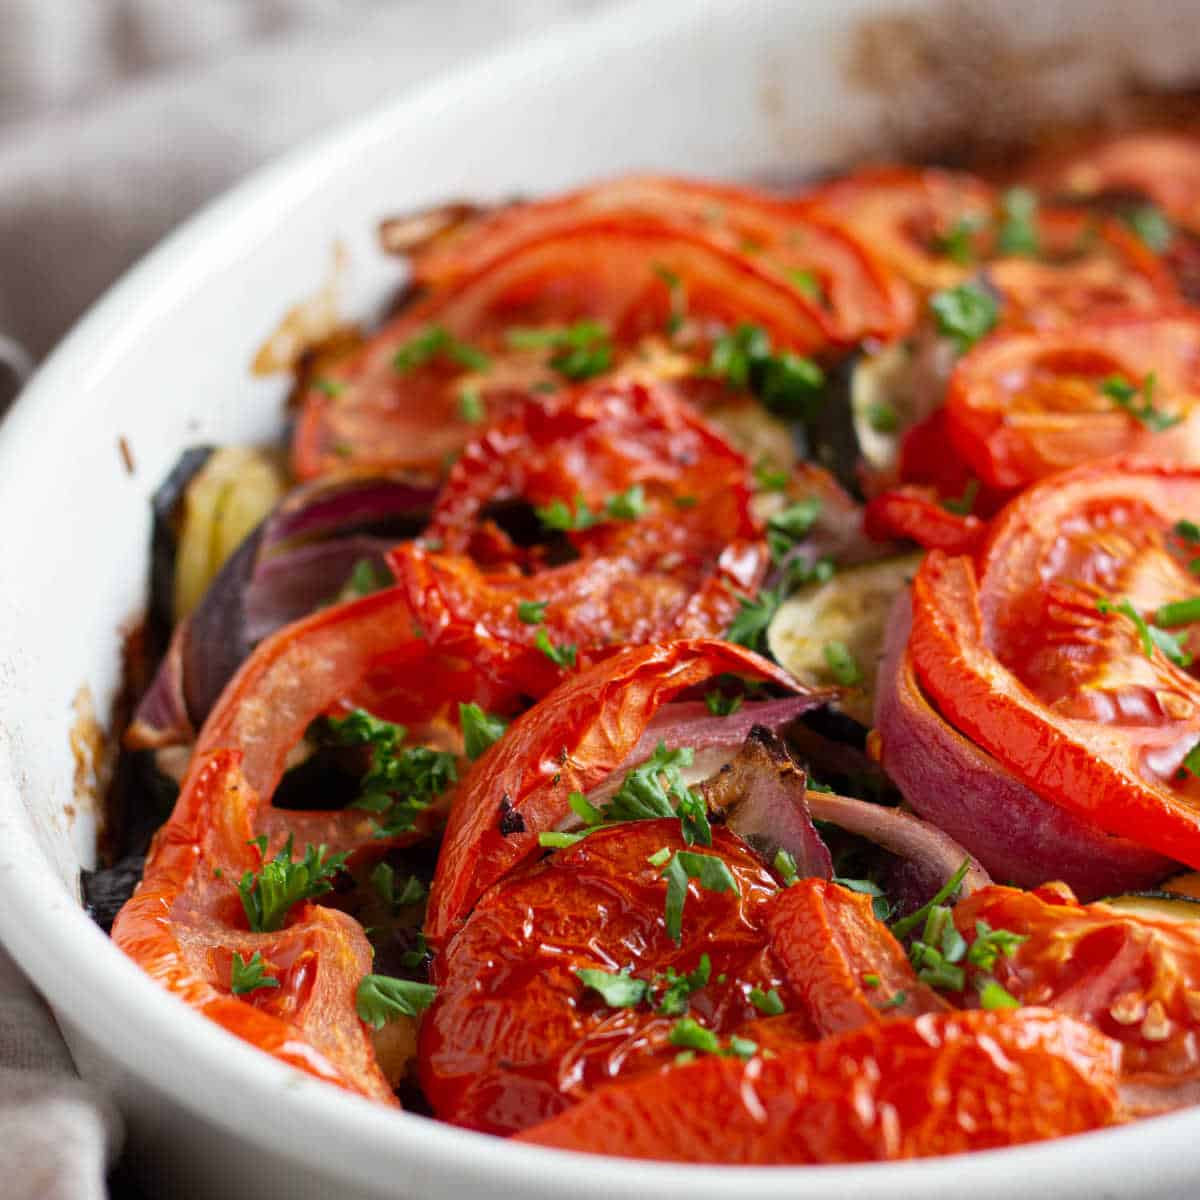 Briam is a roasted vegetables dish cooked in olive oil. This easy and delicious recipe is made with just a few ingredients and is vegan, low carb and gluten free.